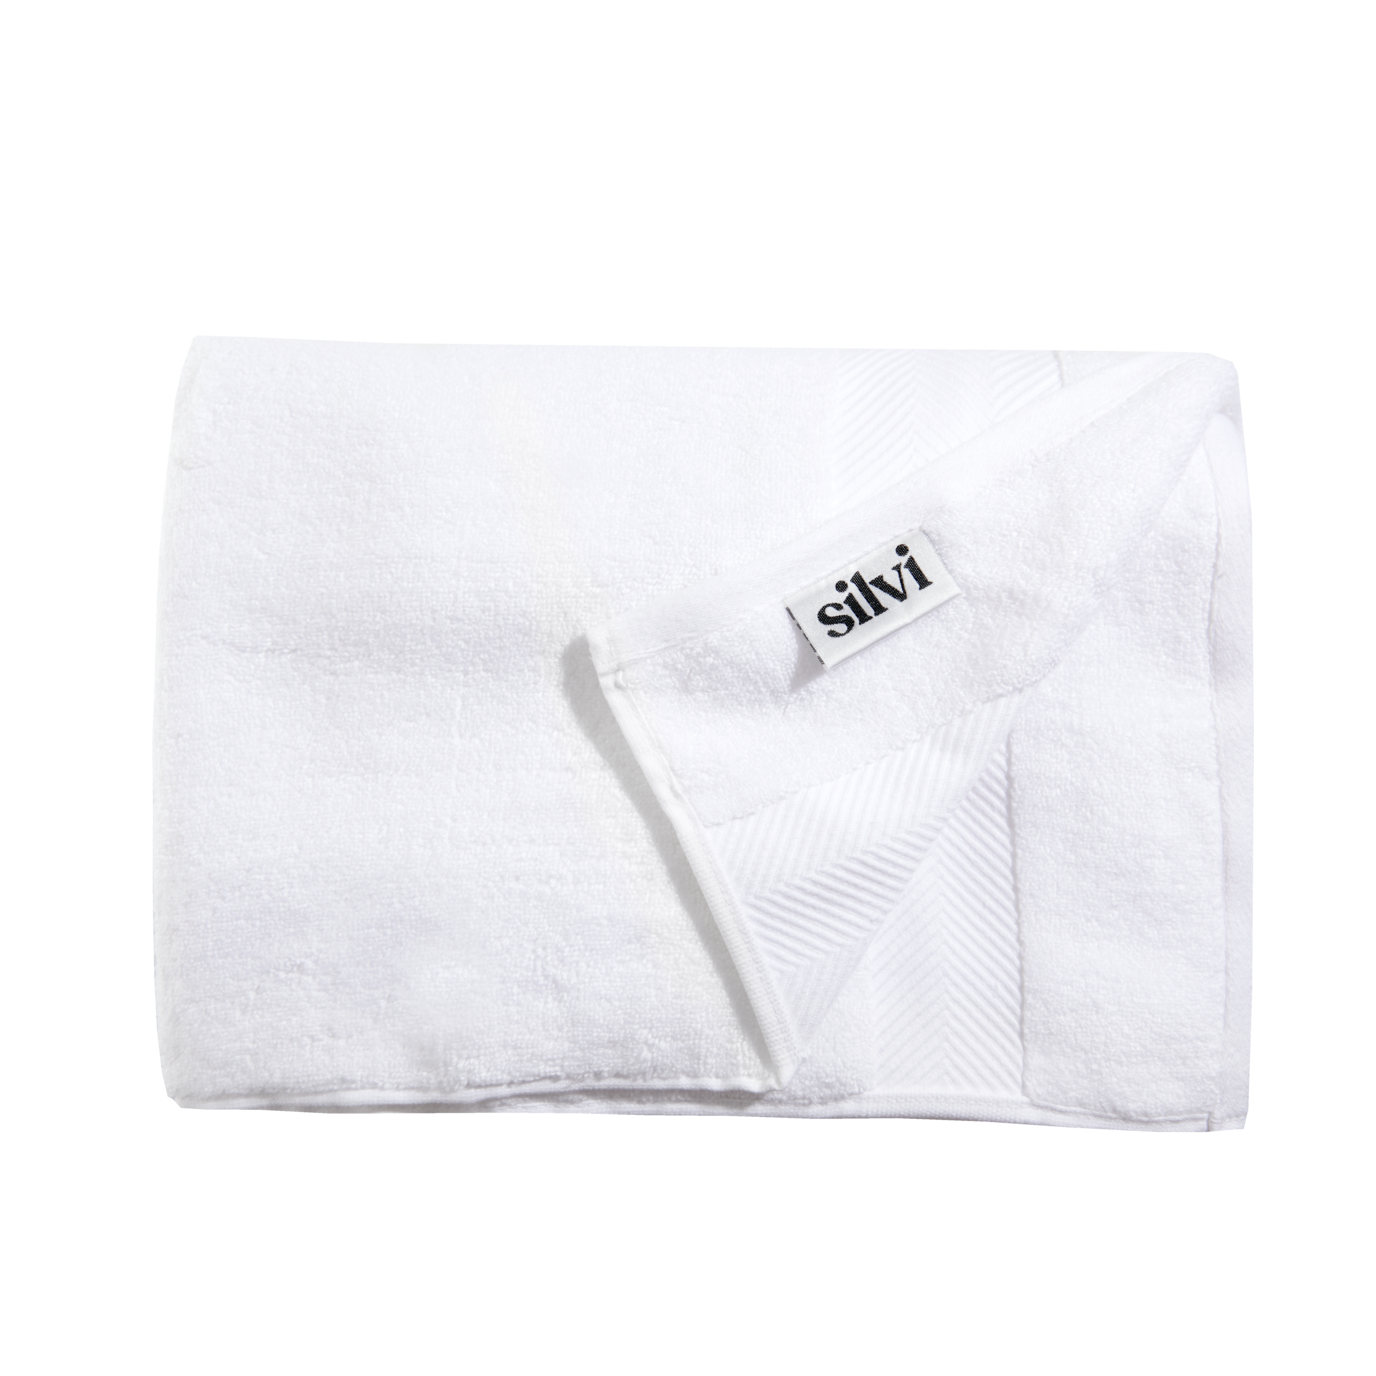 Silvon Premium Antibacterial Bath Towel for Acne Prone Skin-Silver Infused  Smart Fabric - Luxury Bath Towel - No Odor and Acne-Causing Bacteria 